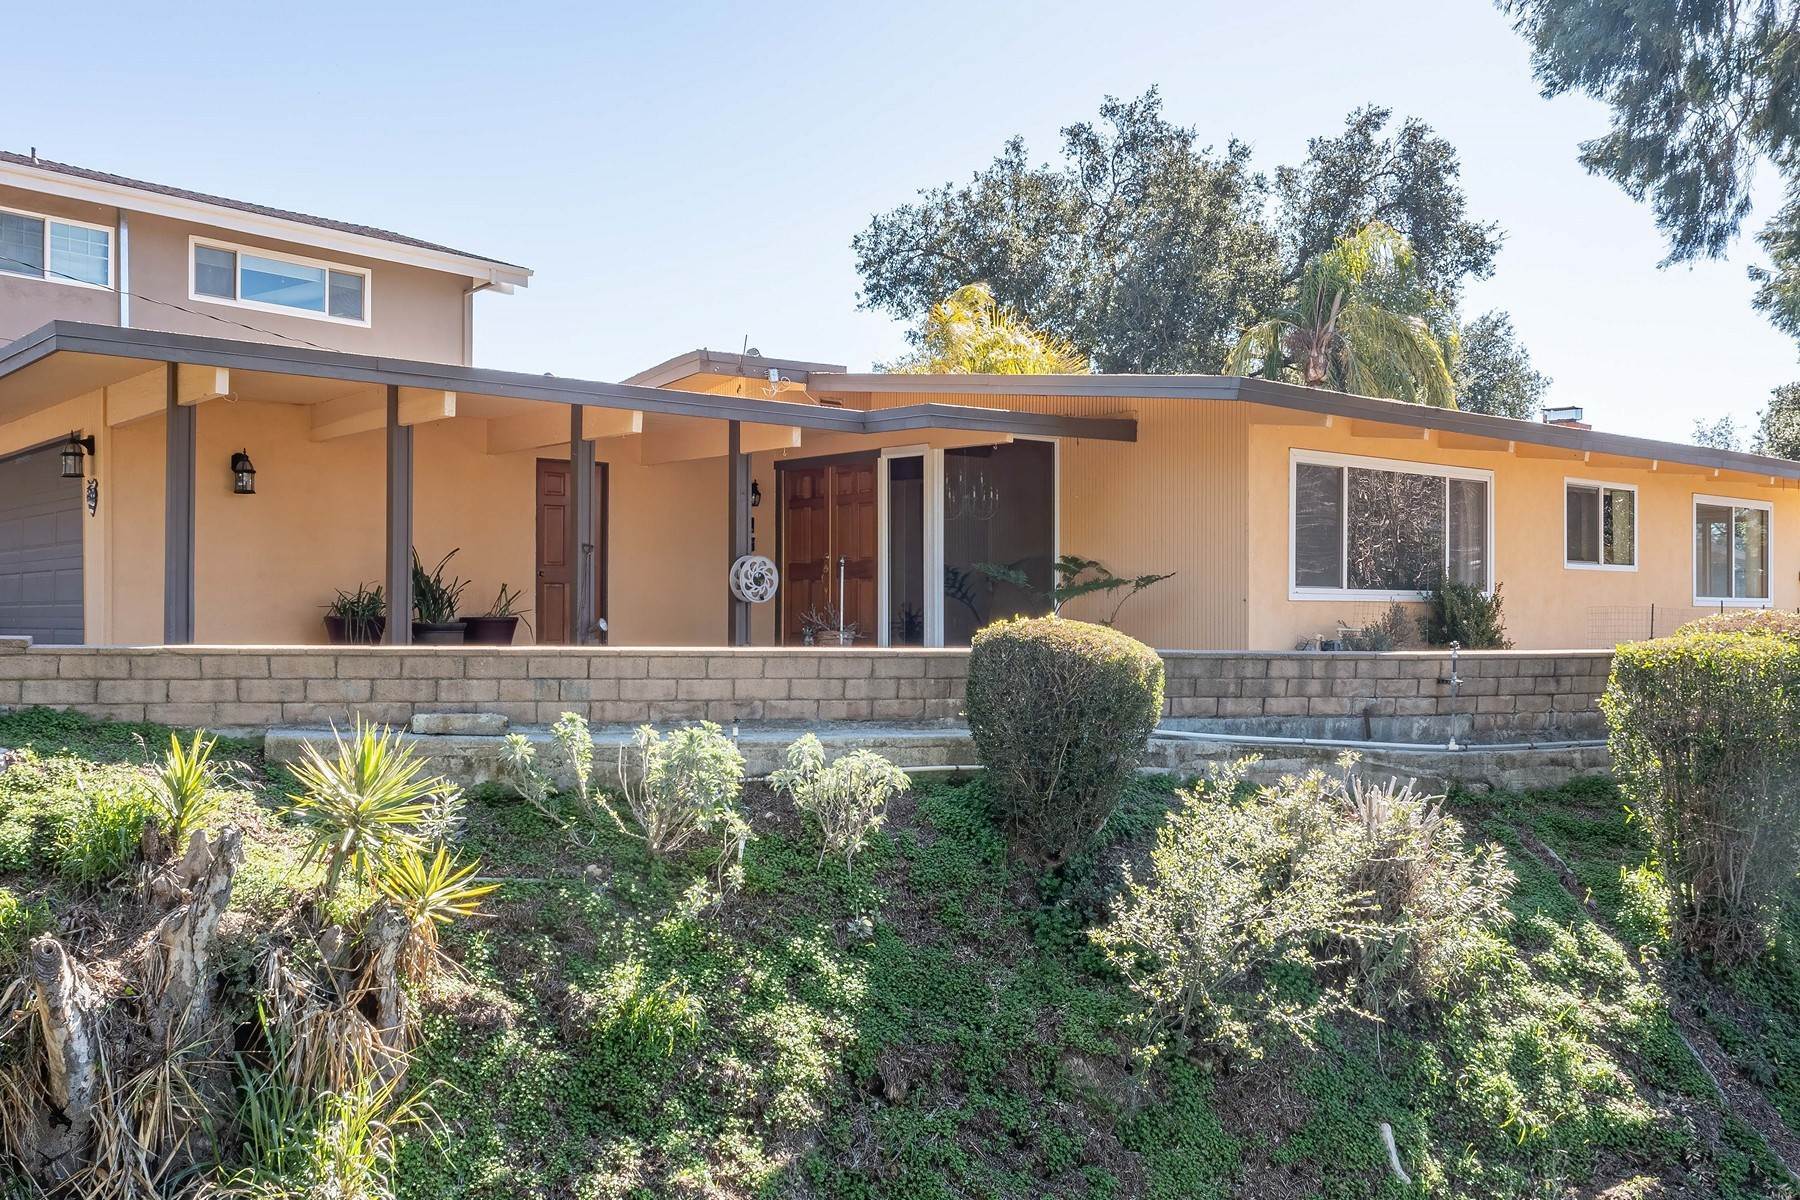 Single Family Homes for Sale at 2475 Shields Street, La Crescenta, CA 91214 2475 Shields Street La Crescenta, California 91214 United States